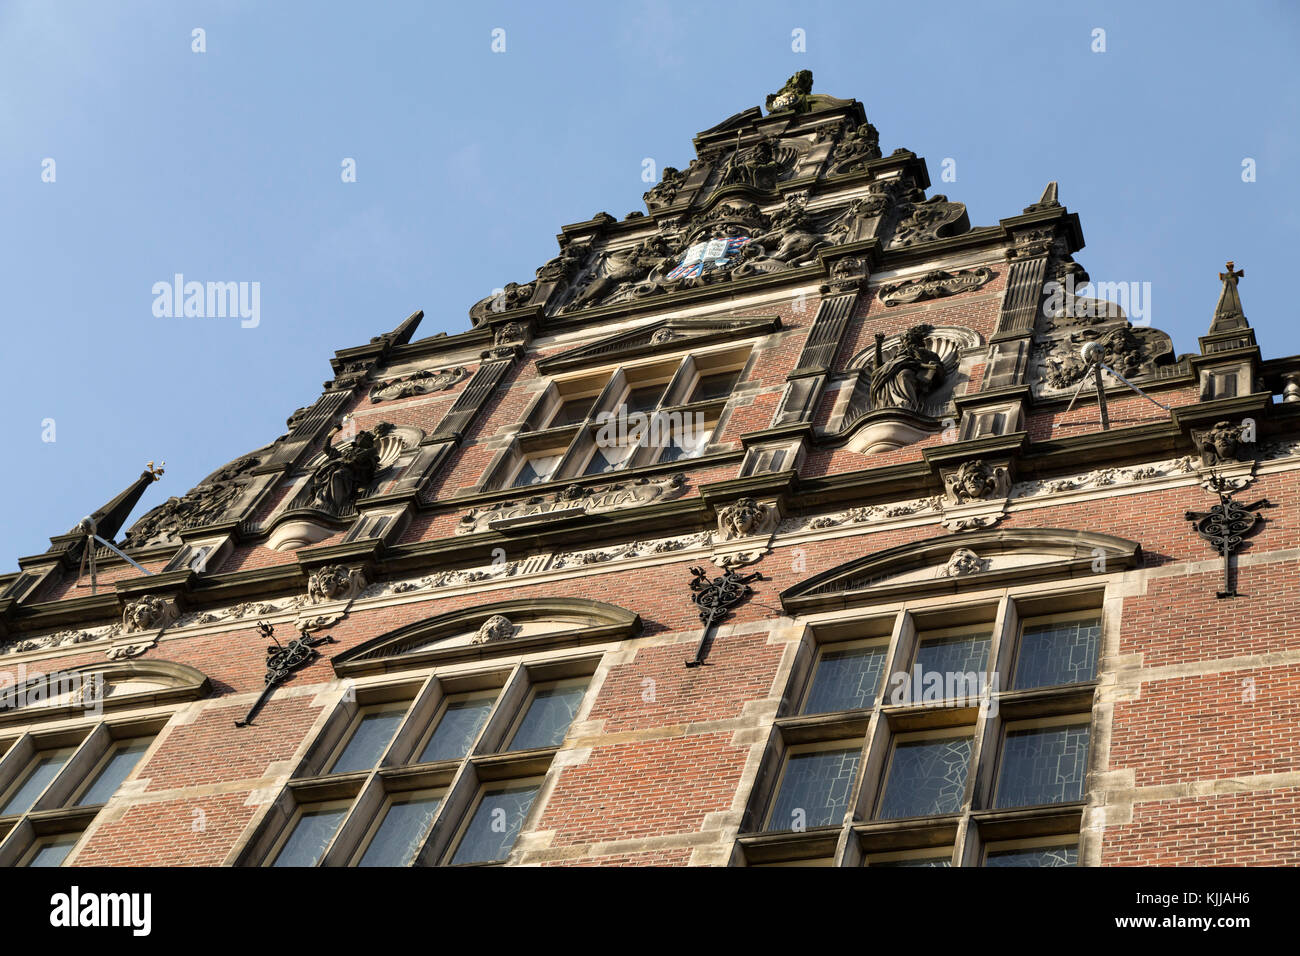 The University of Groningen in Groningen, the Netherlands. The place of education is a long-established place of learning. Stock Photo